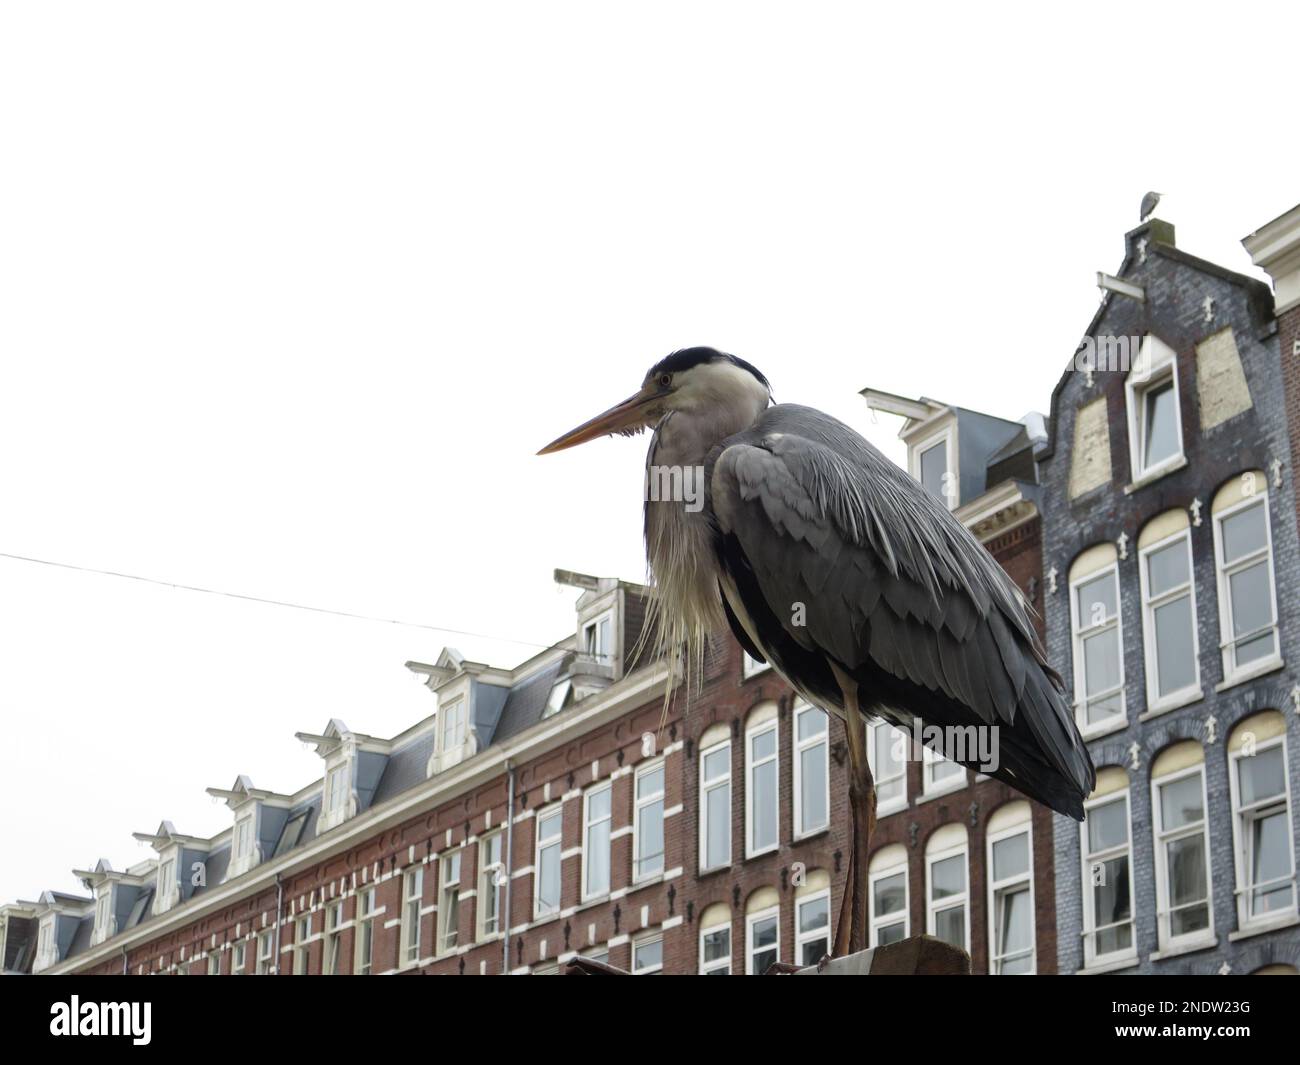 A single Grey Heron (Ardea cinerea) posing in front of a row of old Amsterdam houses. Taken in Amsterdam, Netherlands. Stock Photo